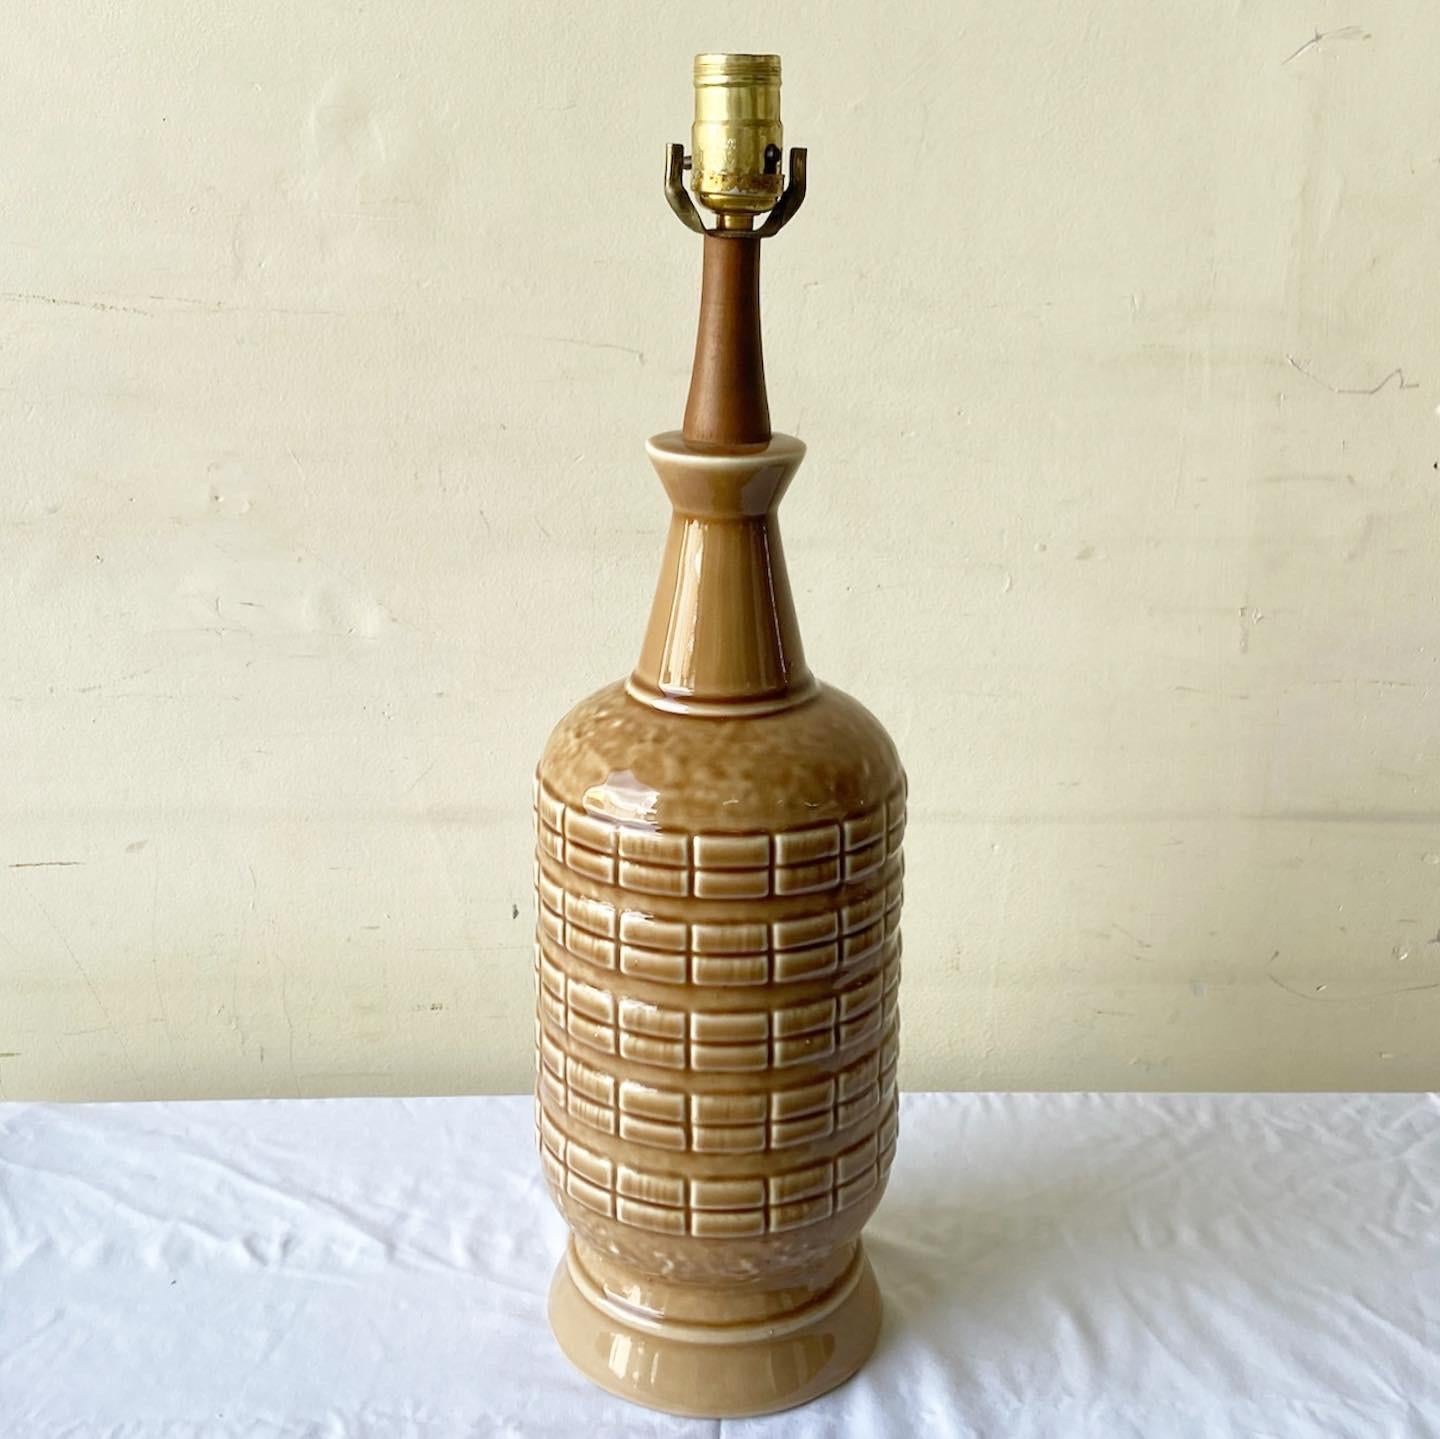 Amazing mid century modern table lamp. Features a brown ceramic body with a wooden neck.

Additional information:
Material: Ceramic, Wood
Color: Brown
Style: Postmodern
Time Period: 1960s
Place of origin: USA
Dimension: 6ʺ W × 6ʺ D × 21.5ʺ L